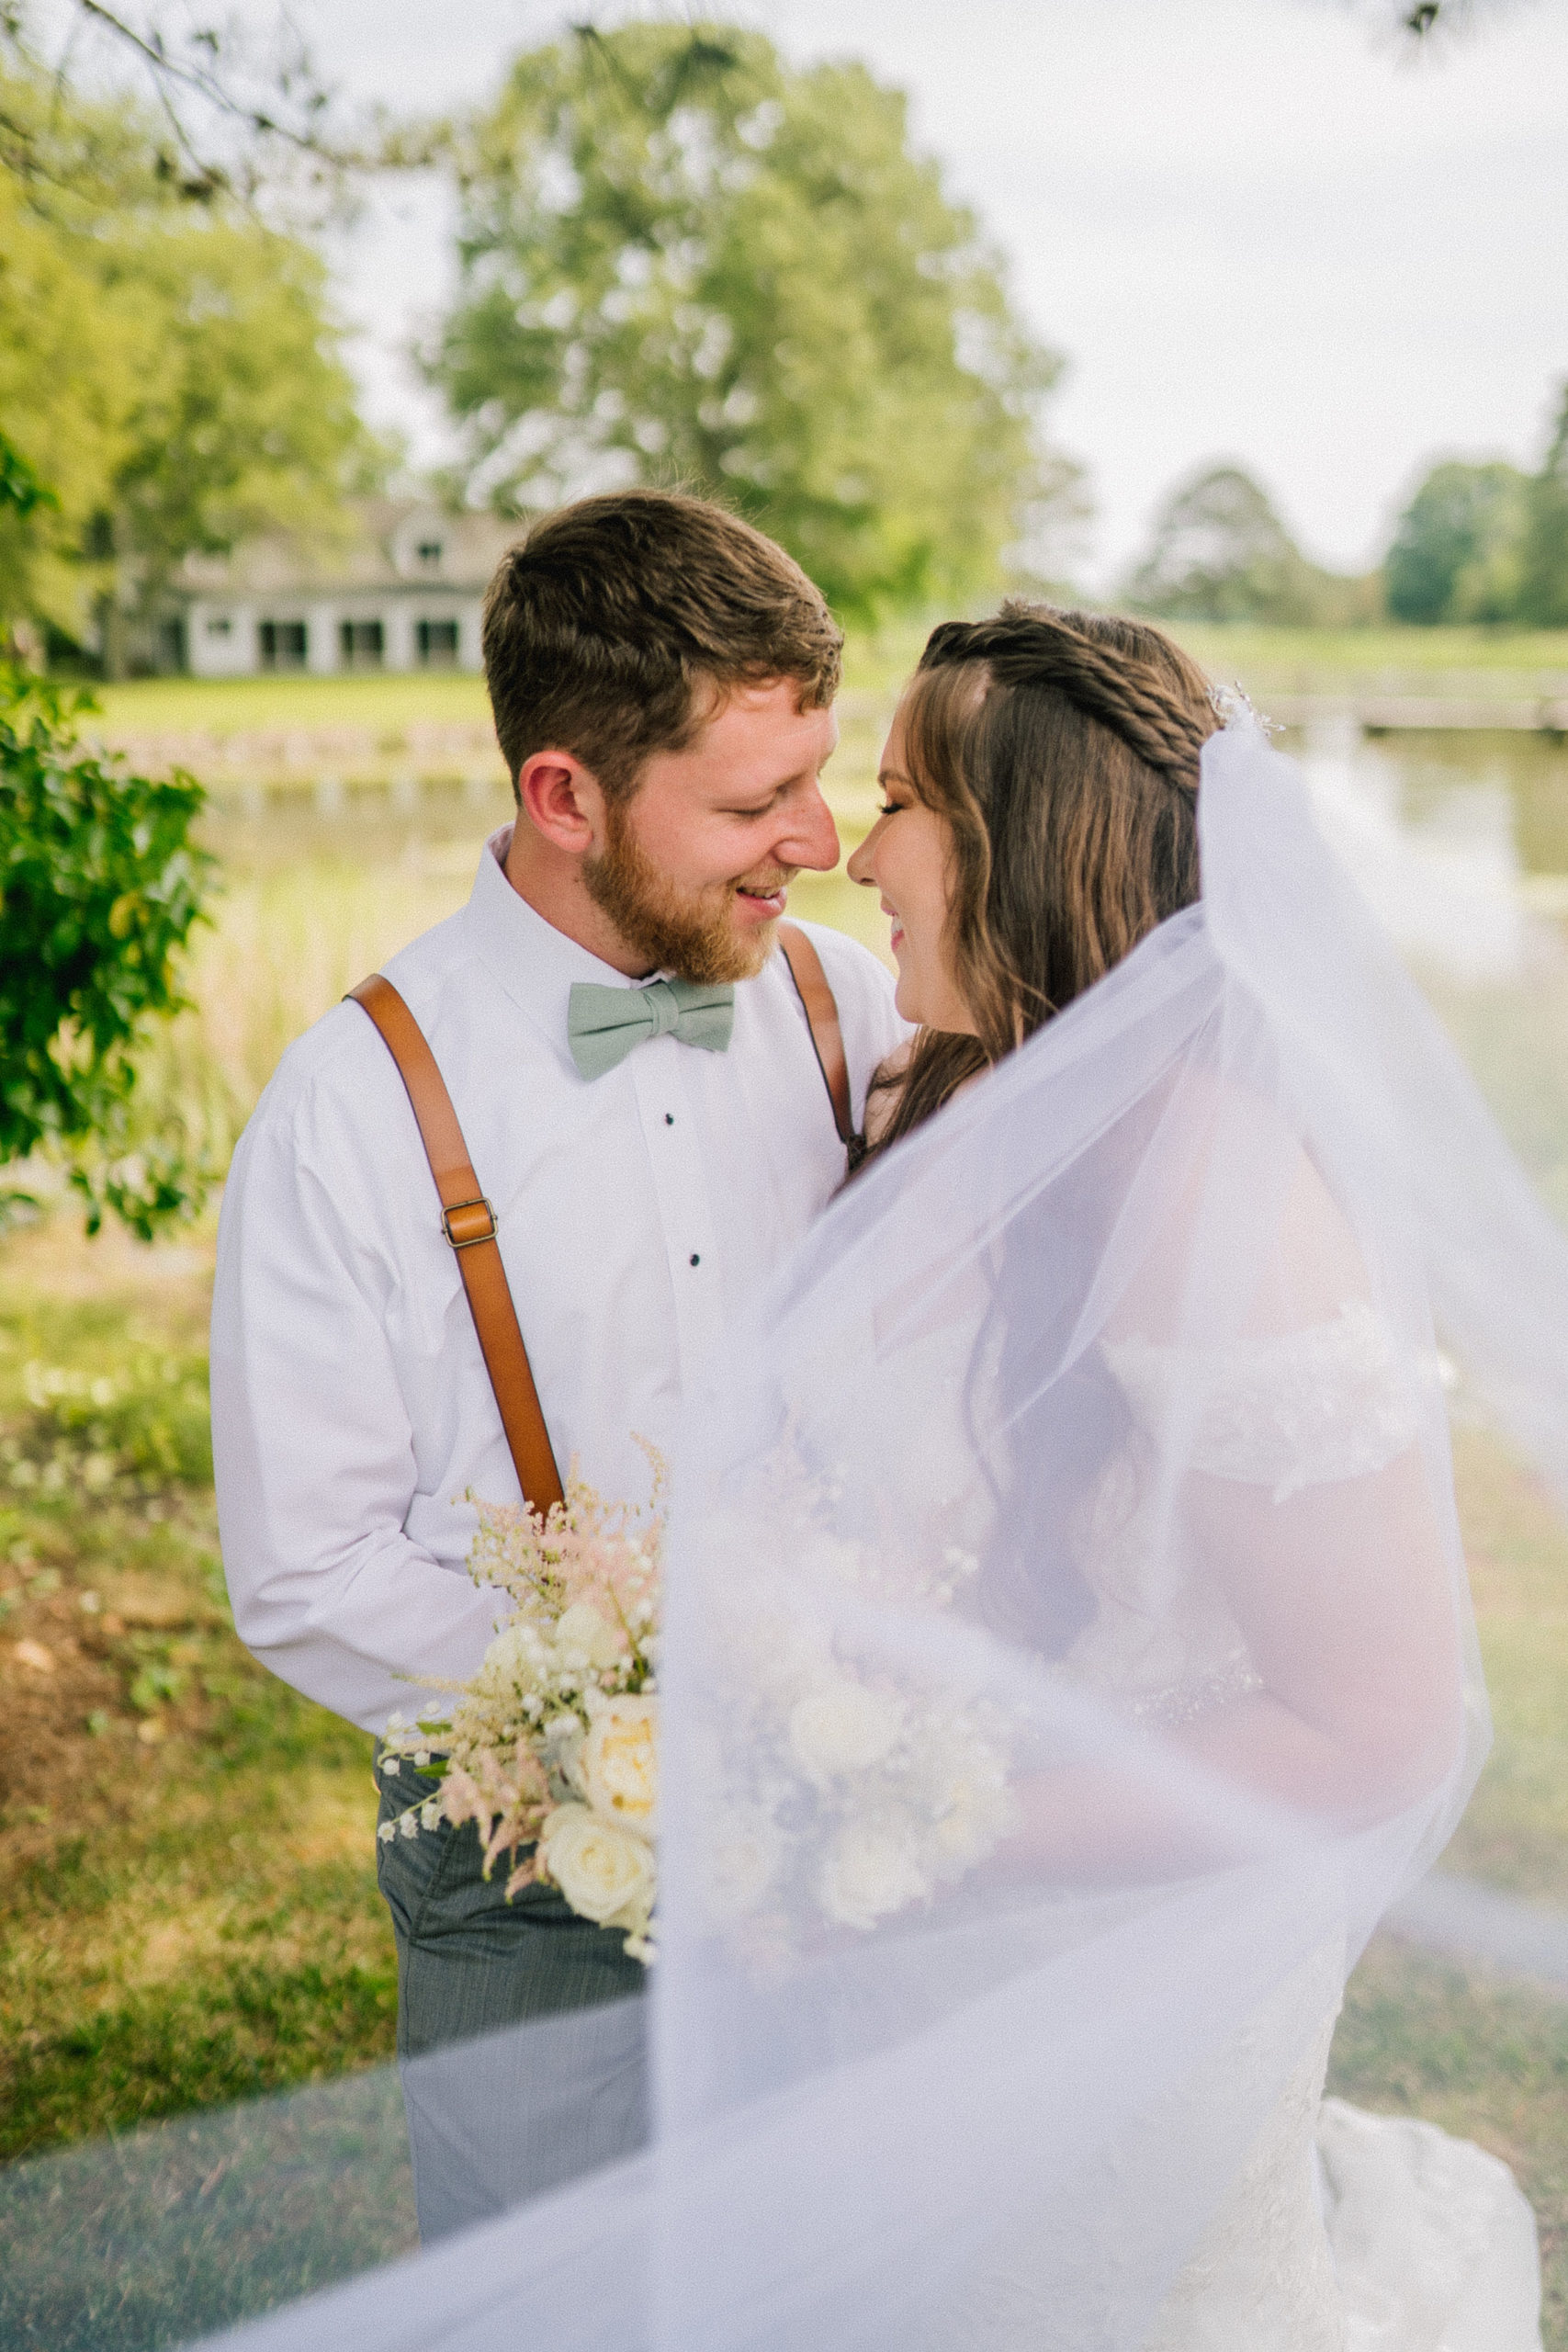 wedding day photos with bride and groom embracing each other and looking romantically into each others eyes with a lake behind them and bright green trees and foliage surrounding them